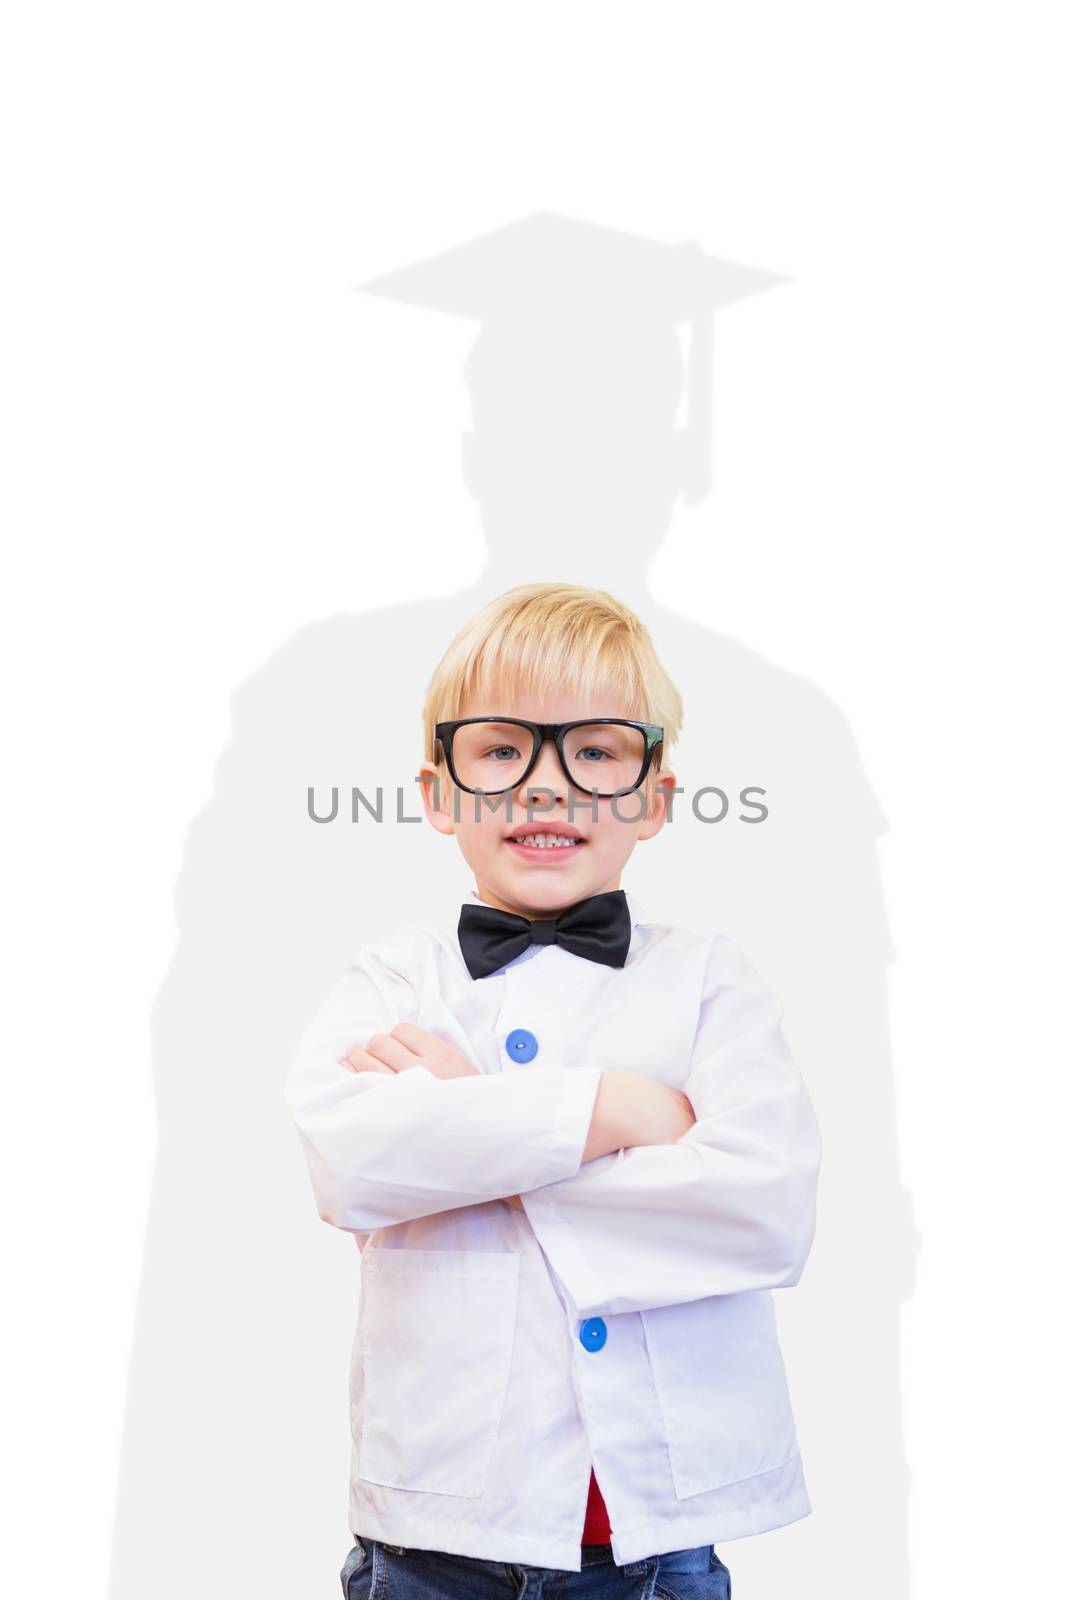 Cute pupil dressed up as teacher against silhouette of graduate